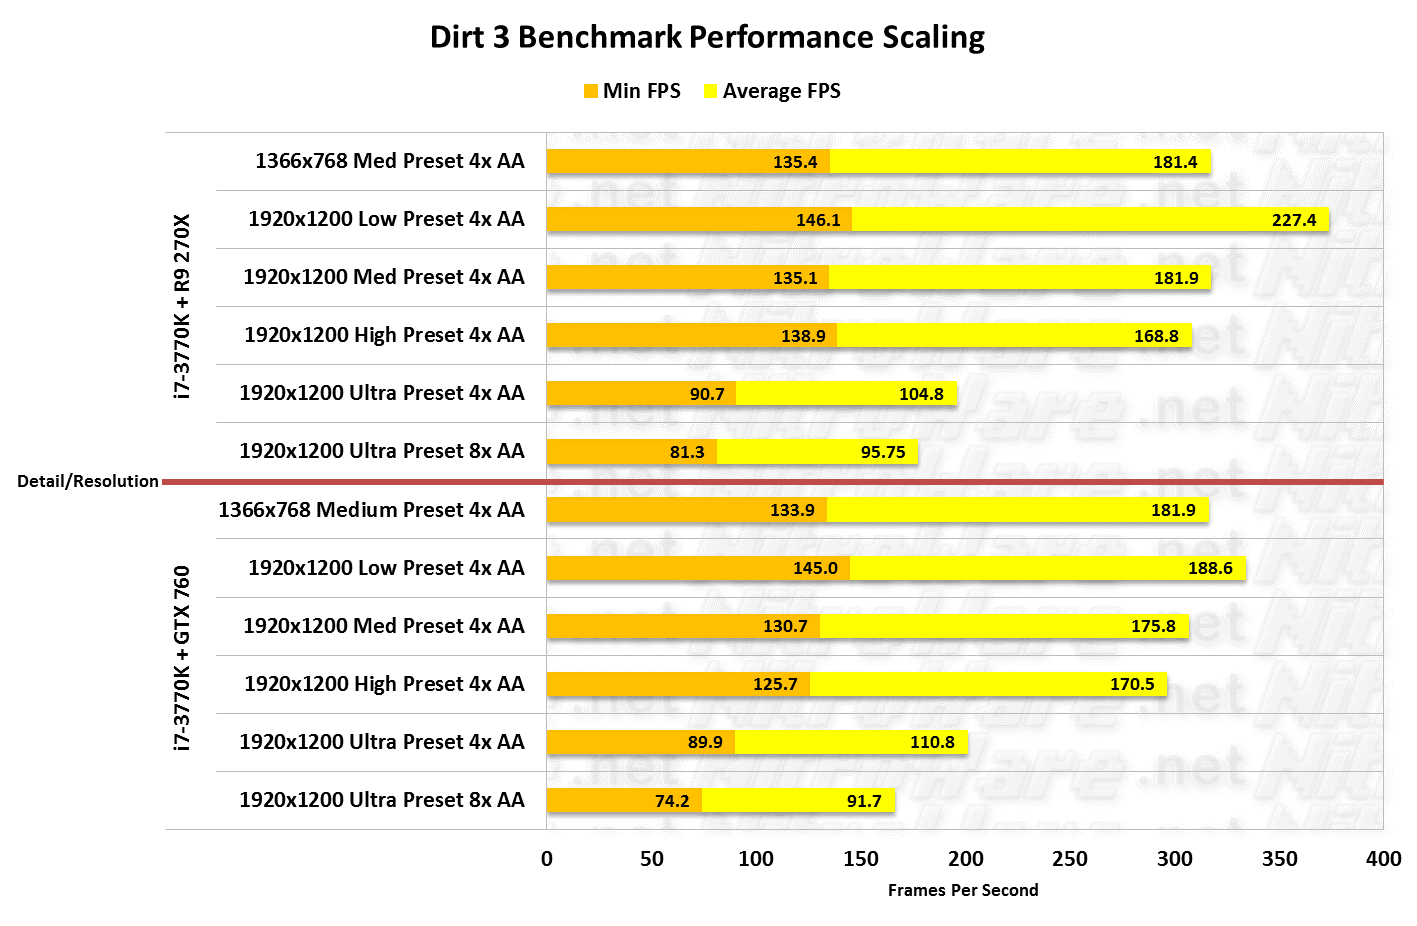 MSI HAWK R9 270X nd GTX 760 Resolution/Detail Scaling in Dirt 3  benchmark frames per second